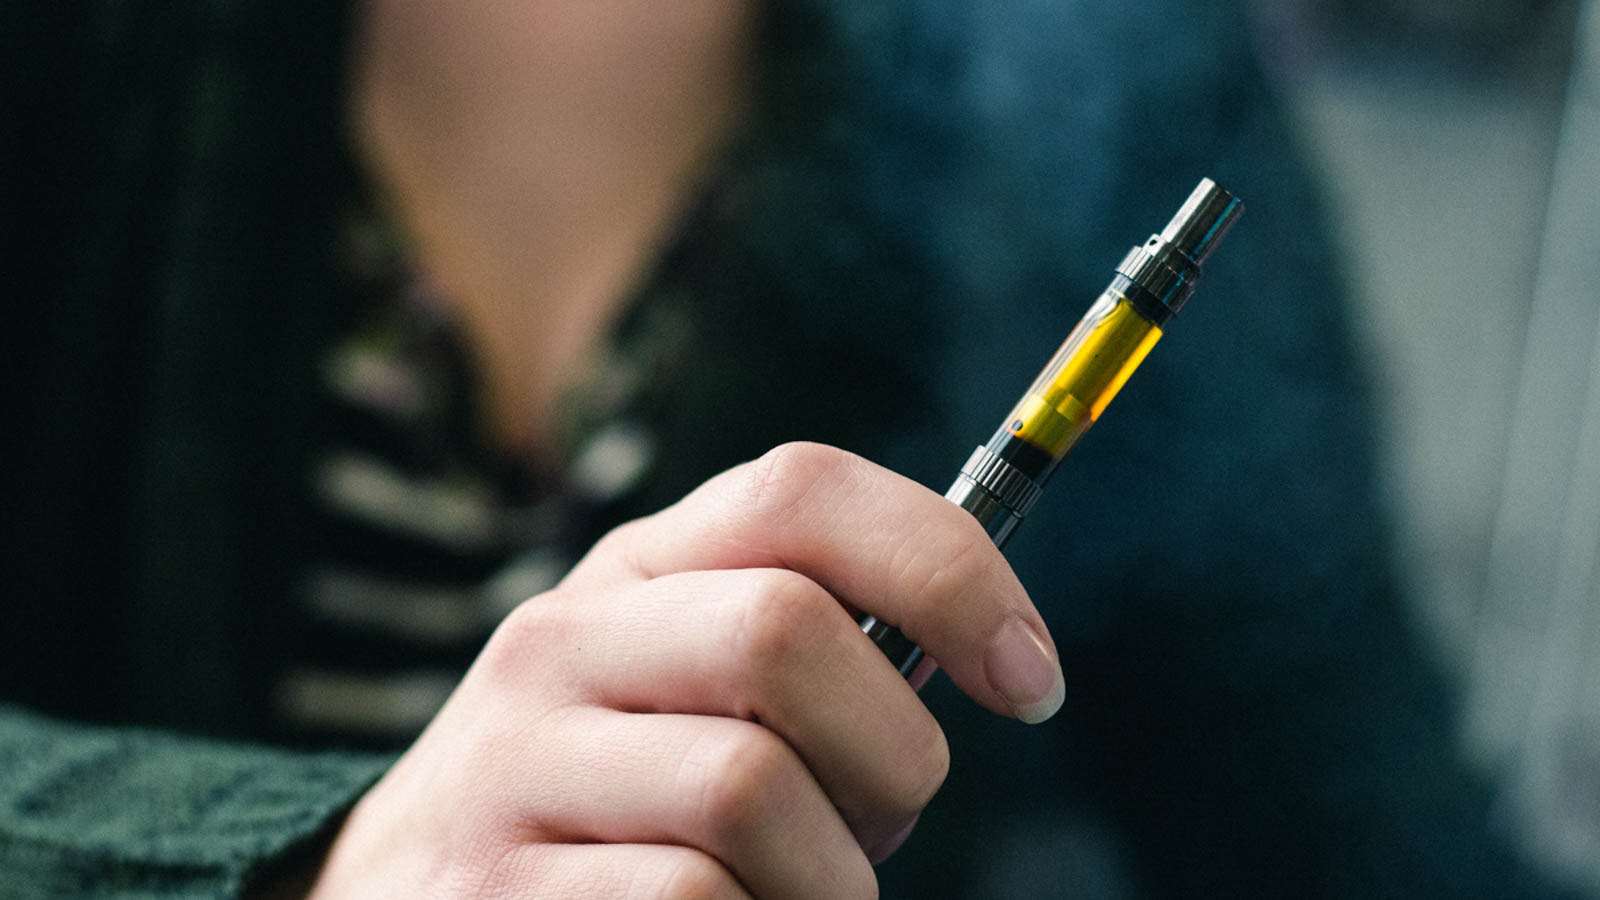 Why Vitamin E Acetate and Other Additives are Causing Concerns about Vaping Cannabis